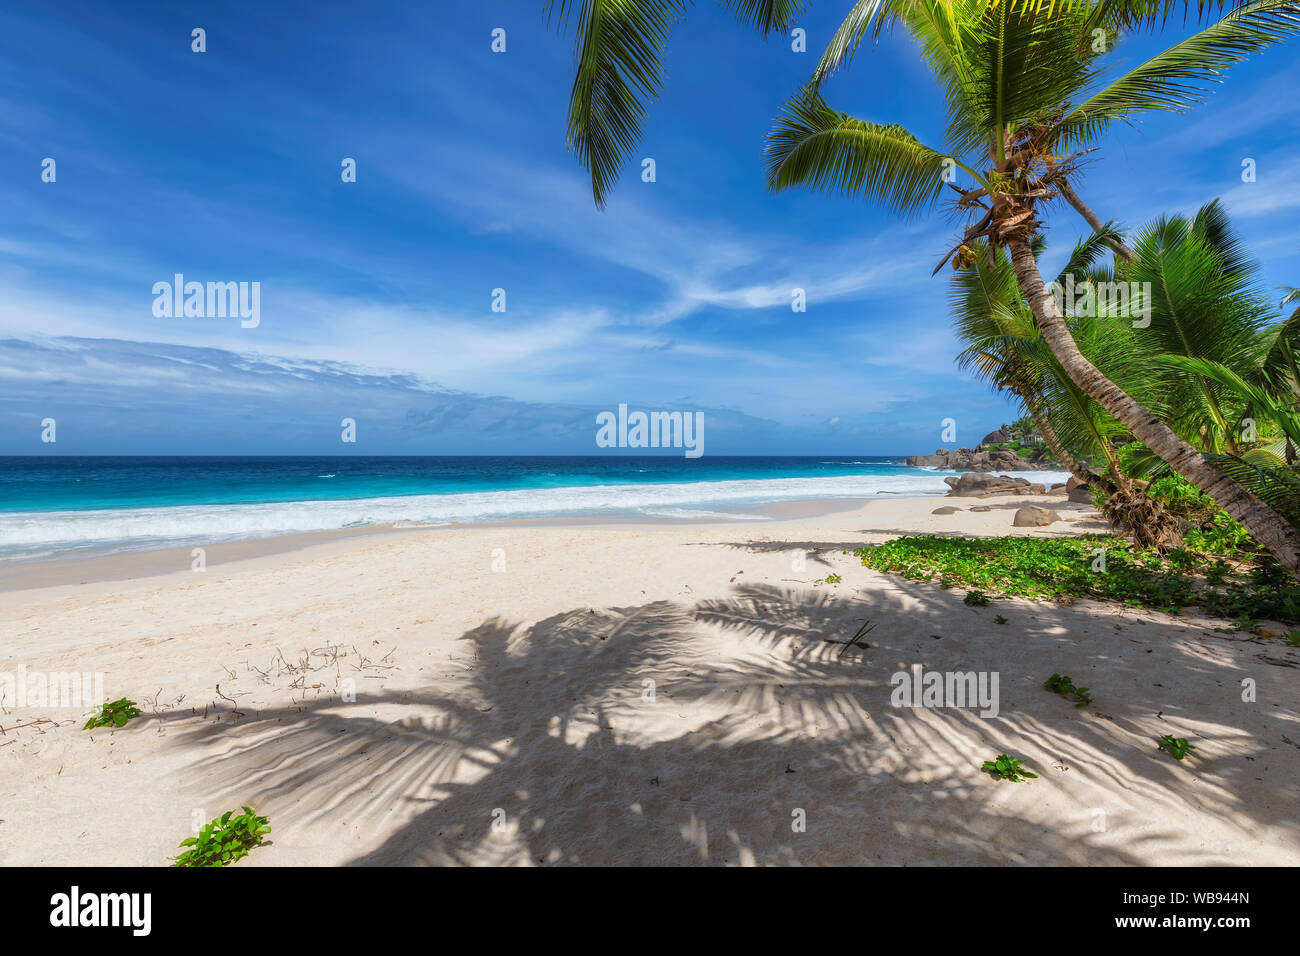 Paradise sandy beach with coconut palm trees and turquoise ocean waves Stock Photo